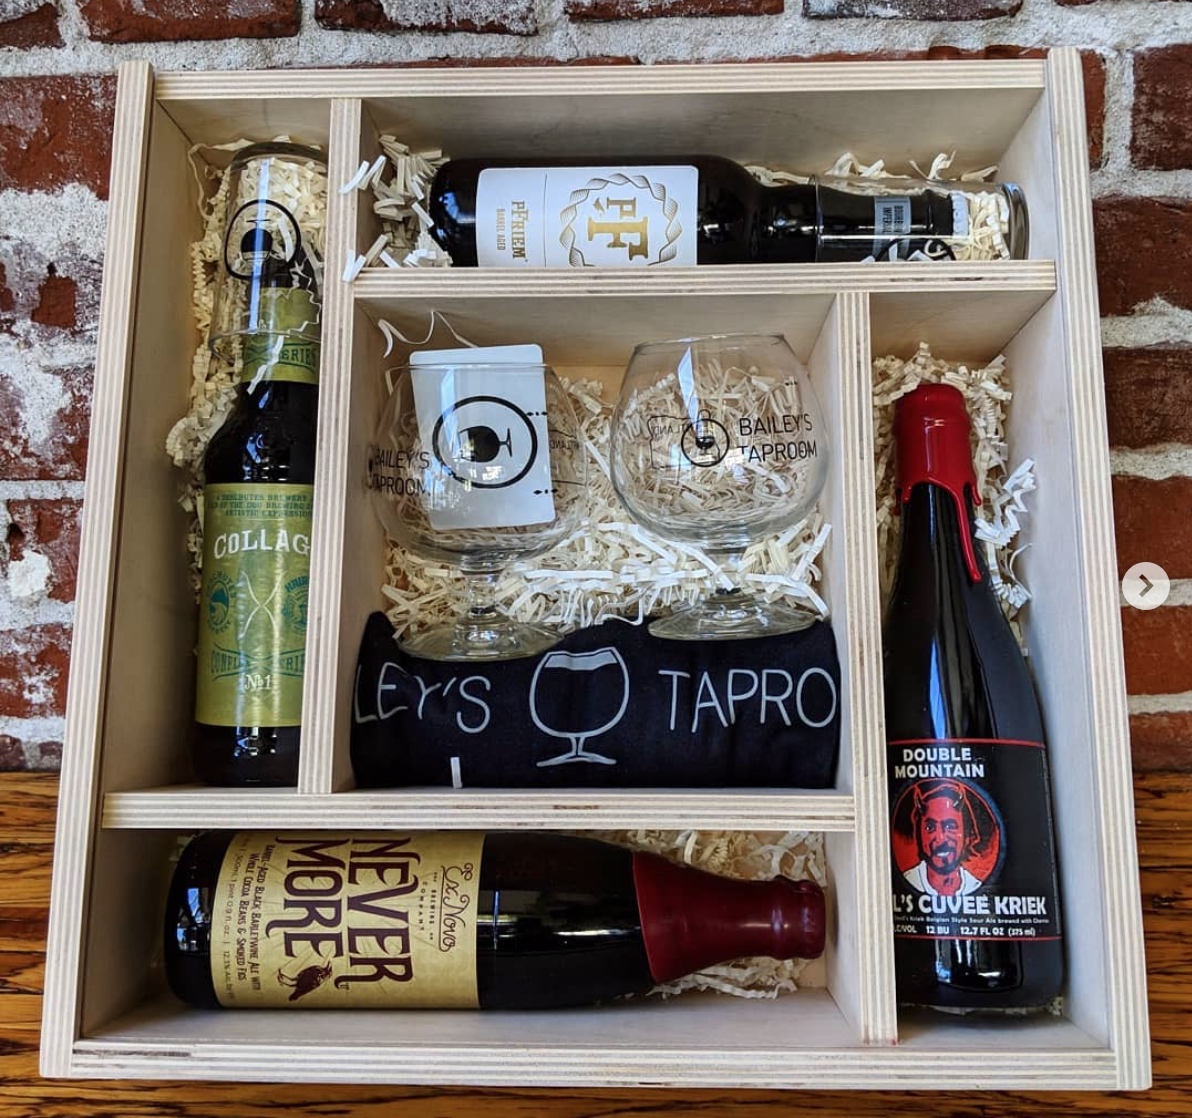 image of the Beer Gift Box courtesy of Bailey's Taproom